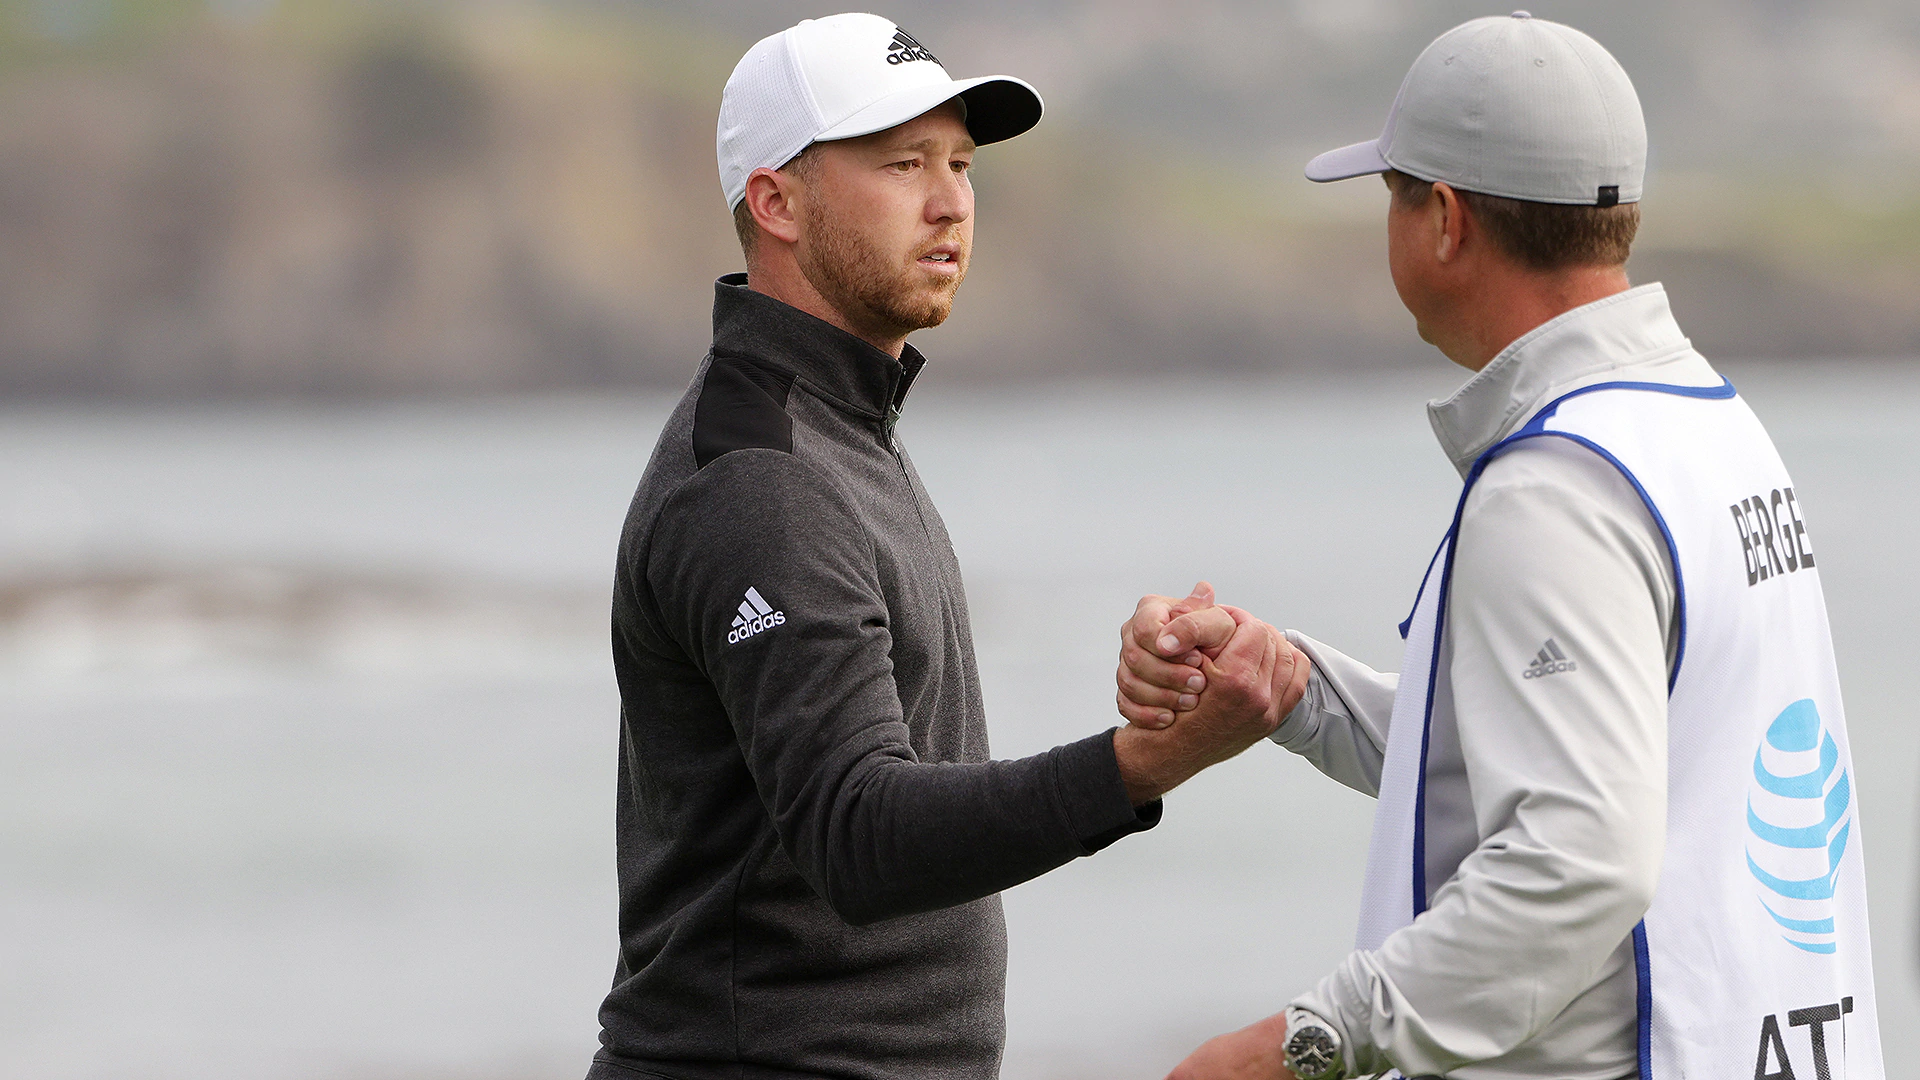 AT&T Pebble Beach purse payout: Daniel Berger bags more than $1.4 million